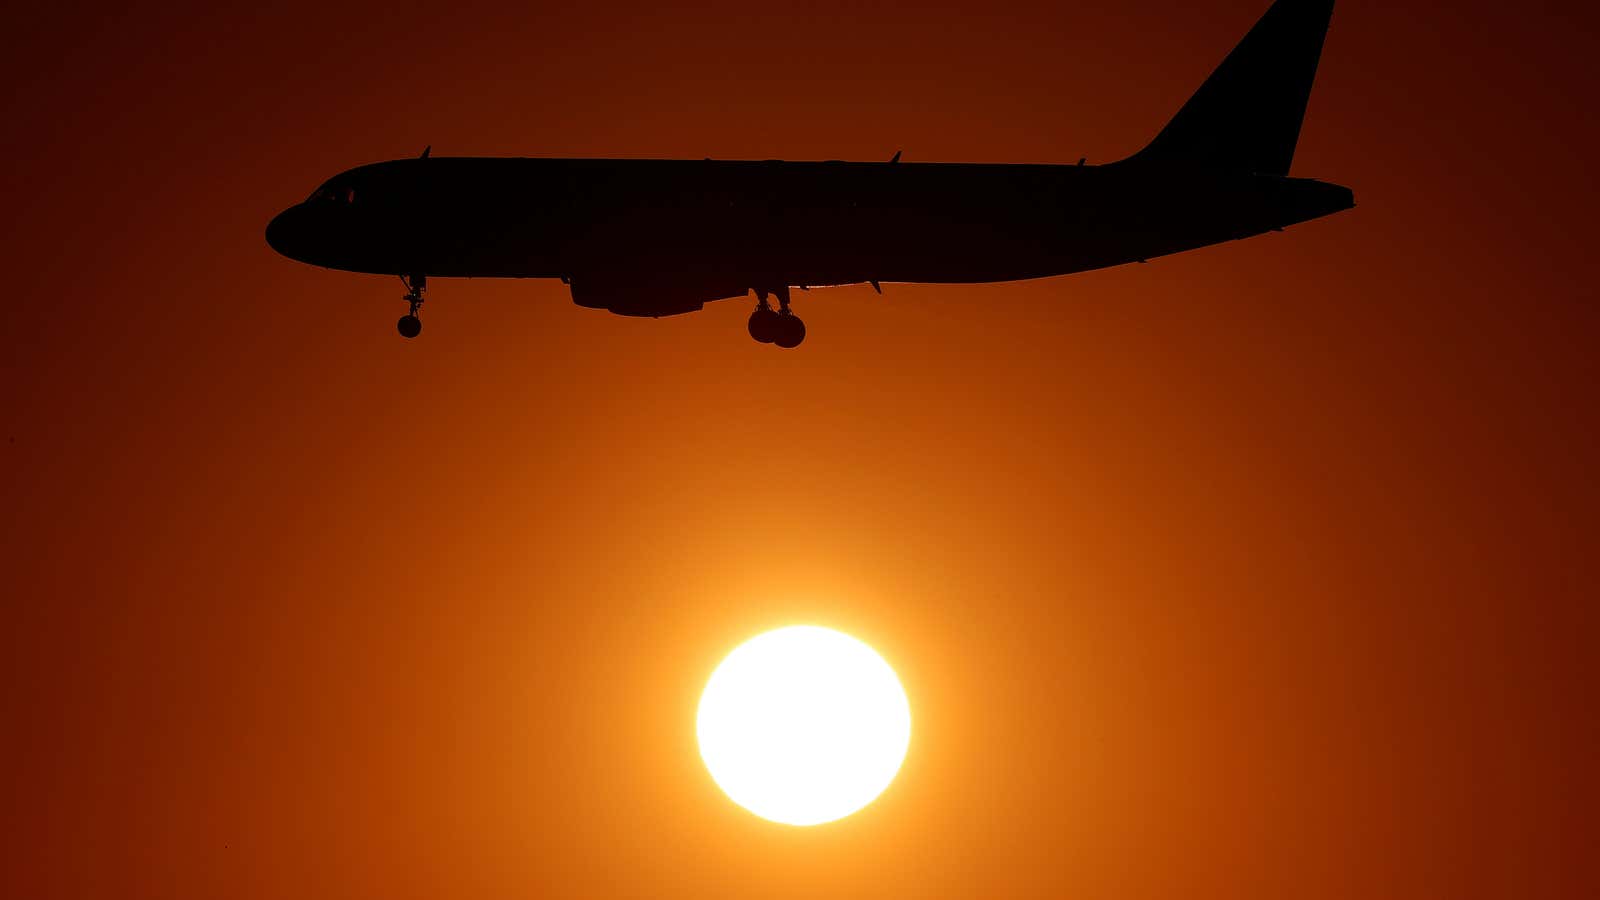 Airlines are relying on dubious carbon offsets to reach their climate goals.